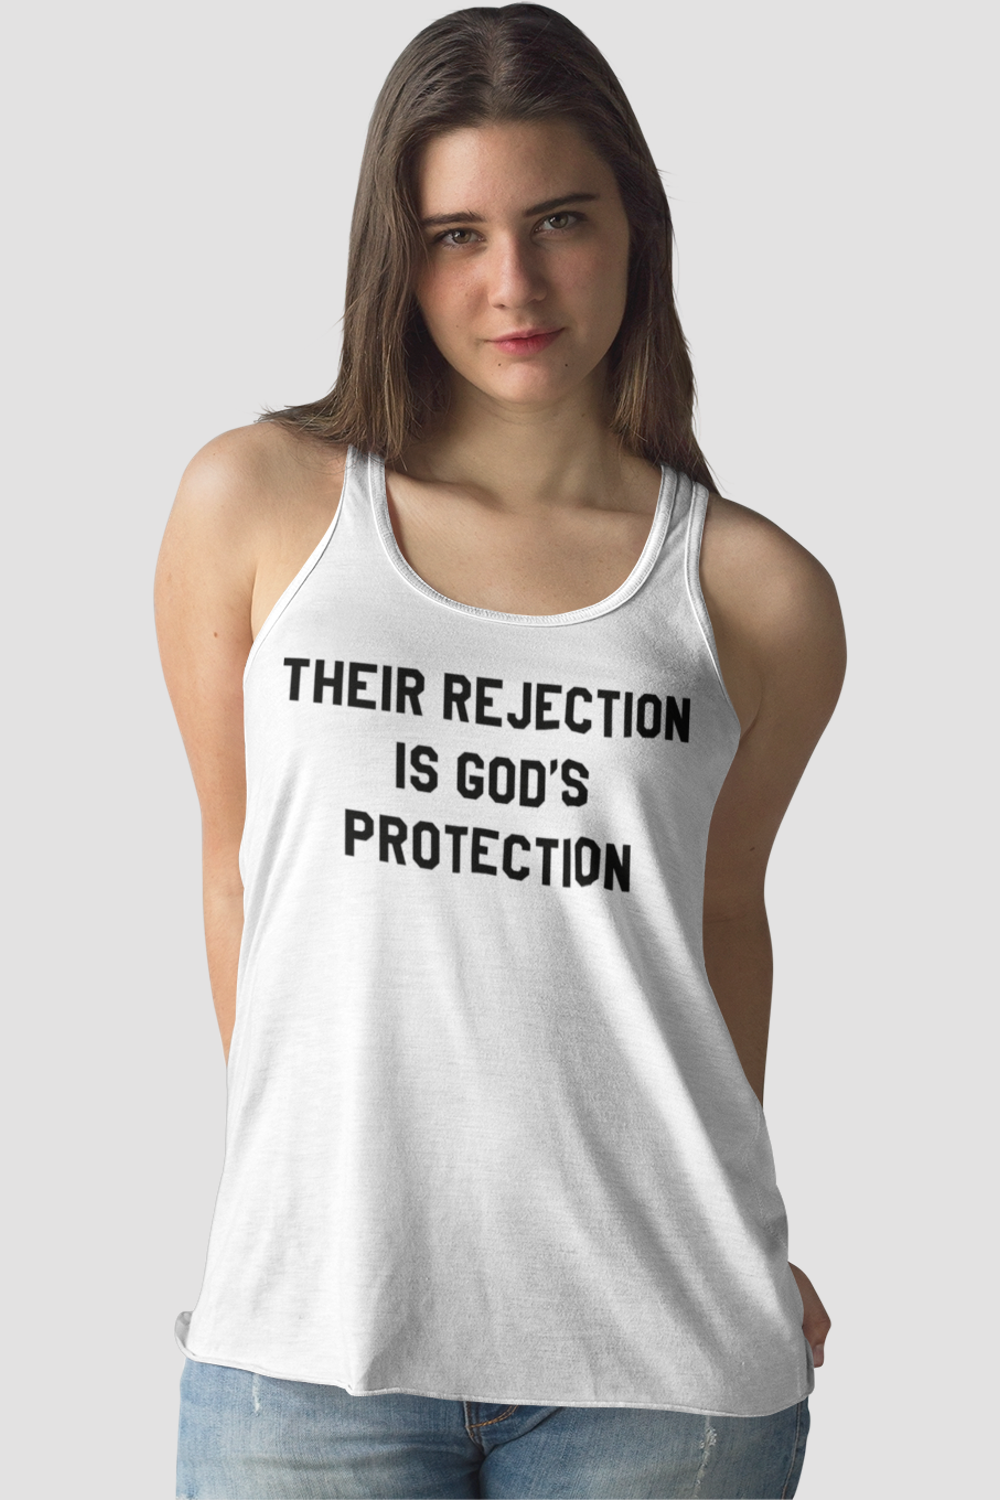 Their Rejection Is God's Protection Women's Cut Racerback Tank Top